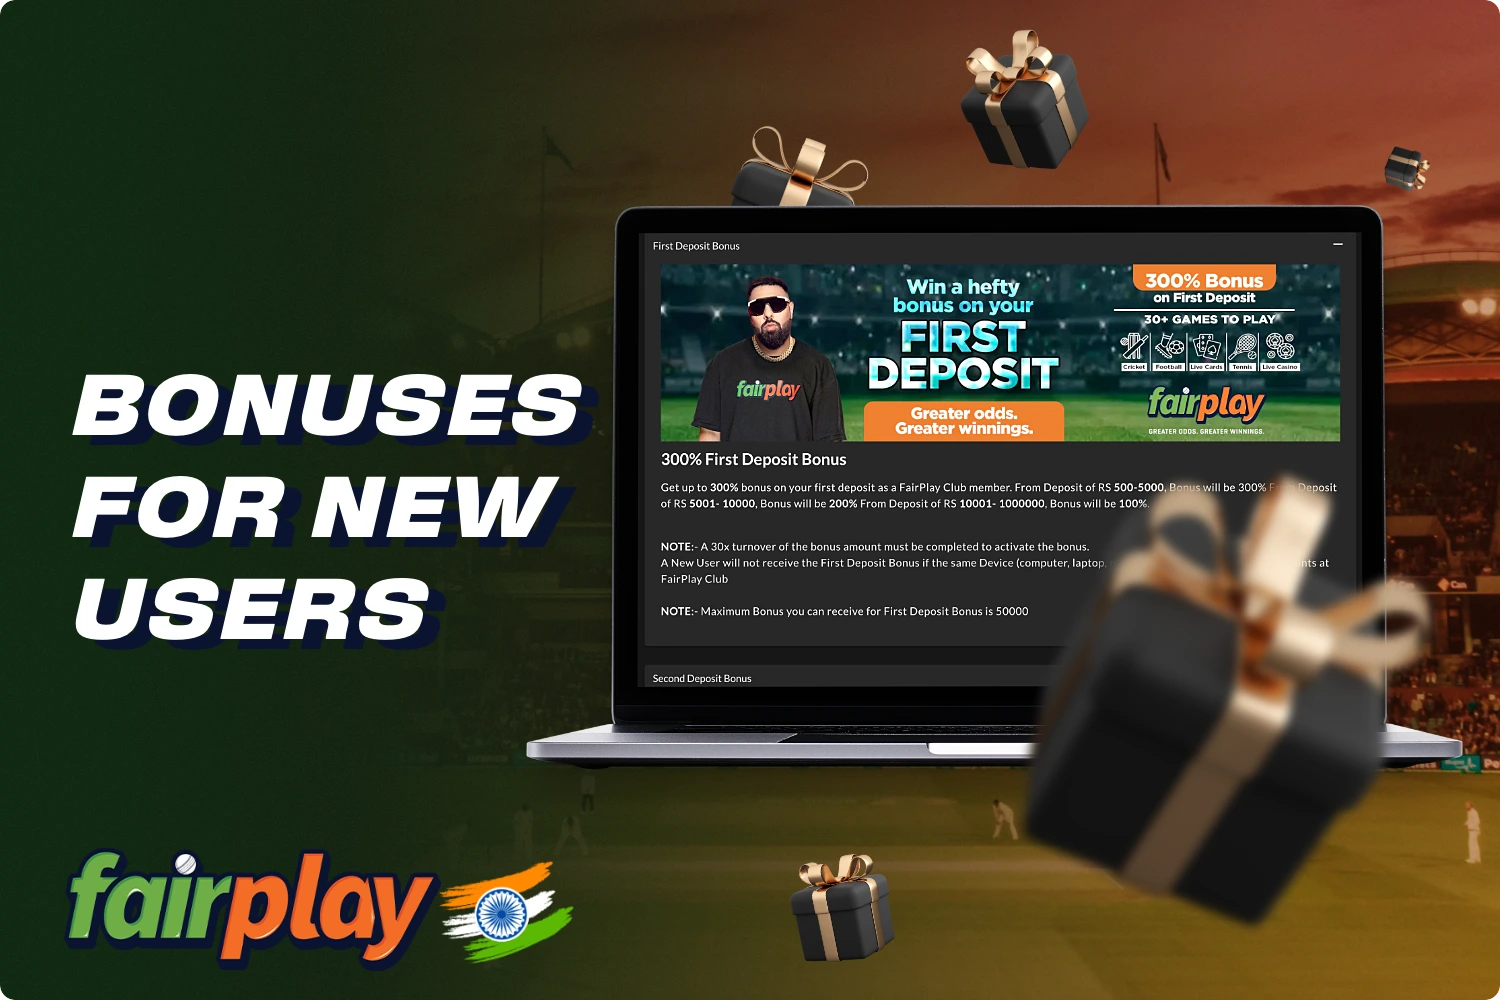 New Fairplay users from India can get a generous welcome bonus